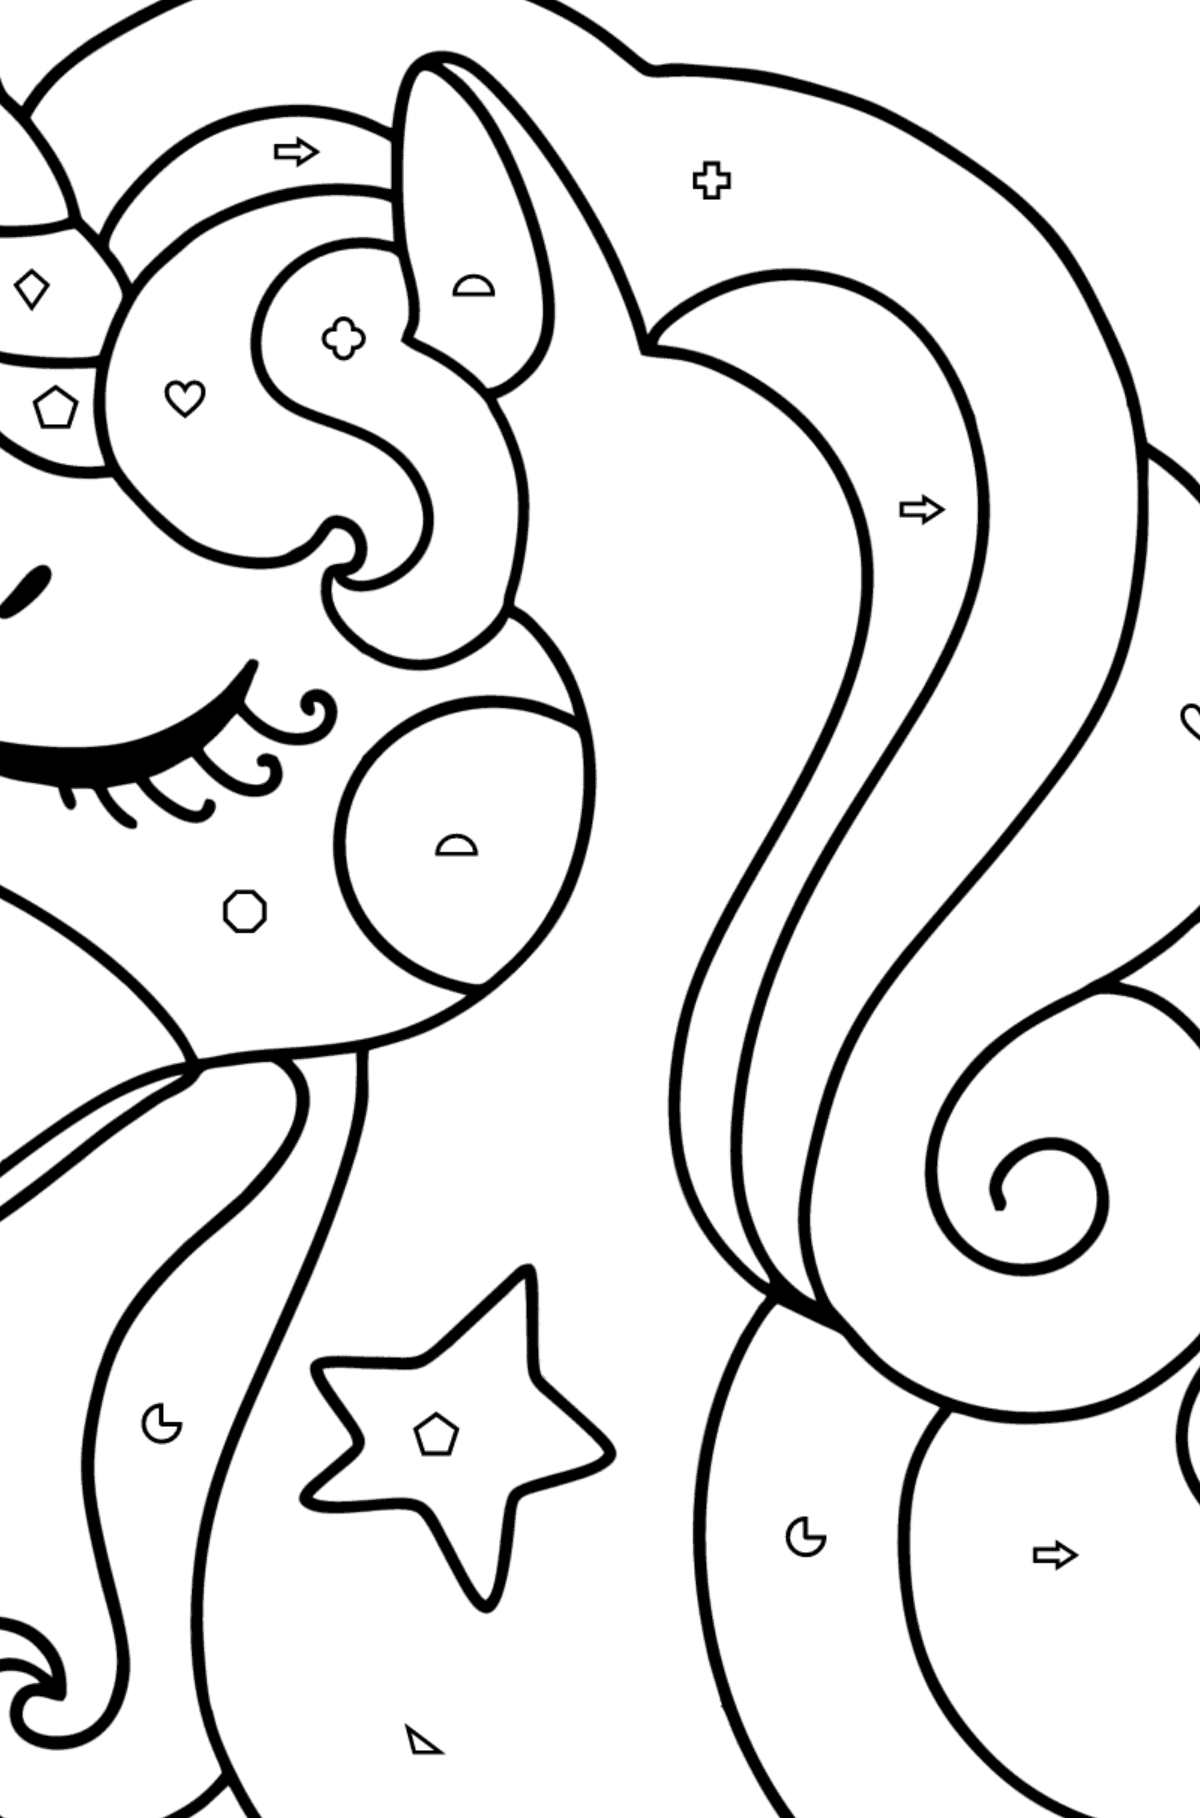 Unicorn head coloring page - Coloring by Geometric Shapes for Kids